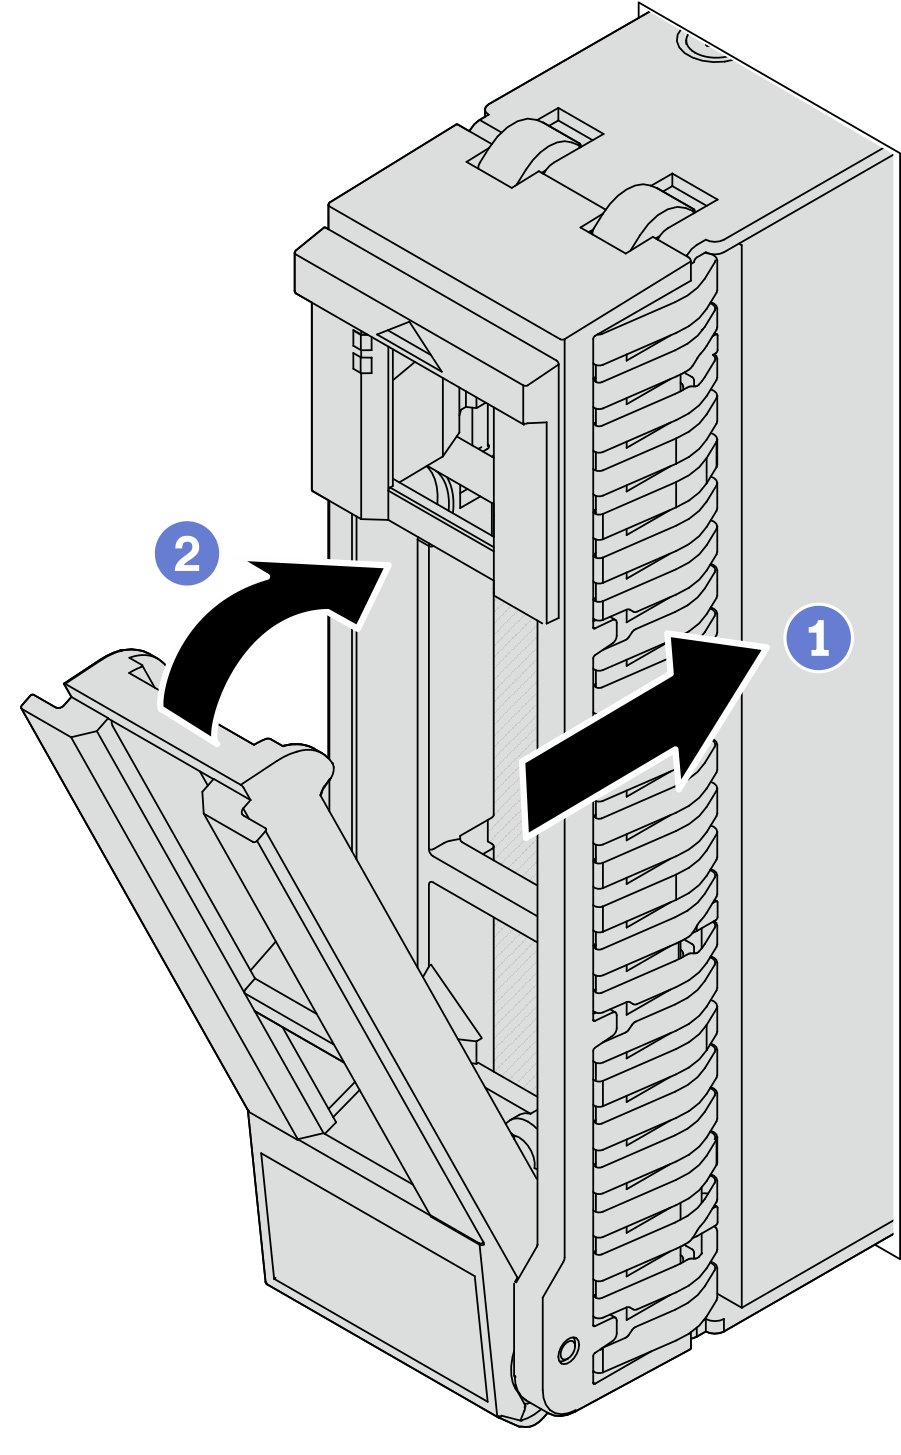 Opening the drive tray handle